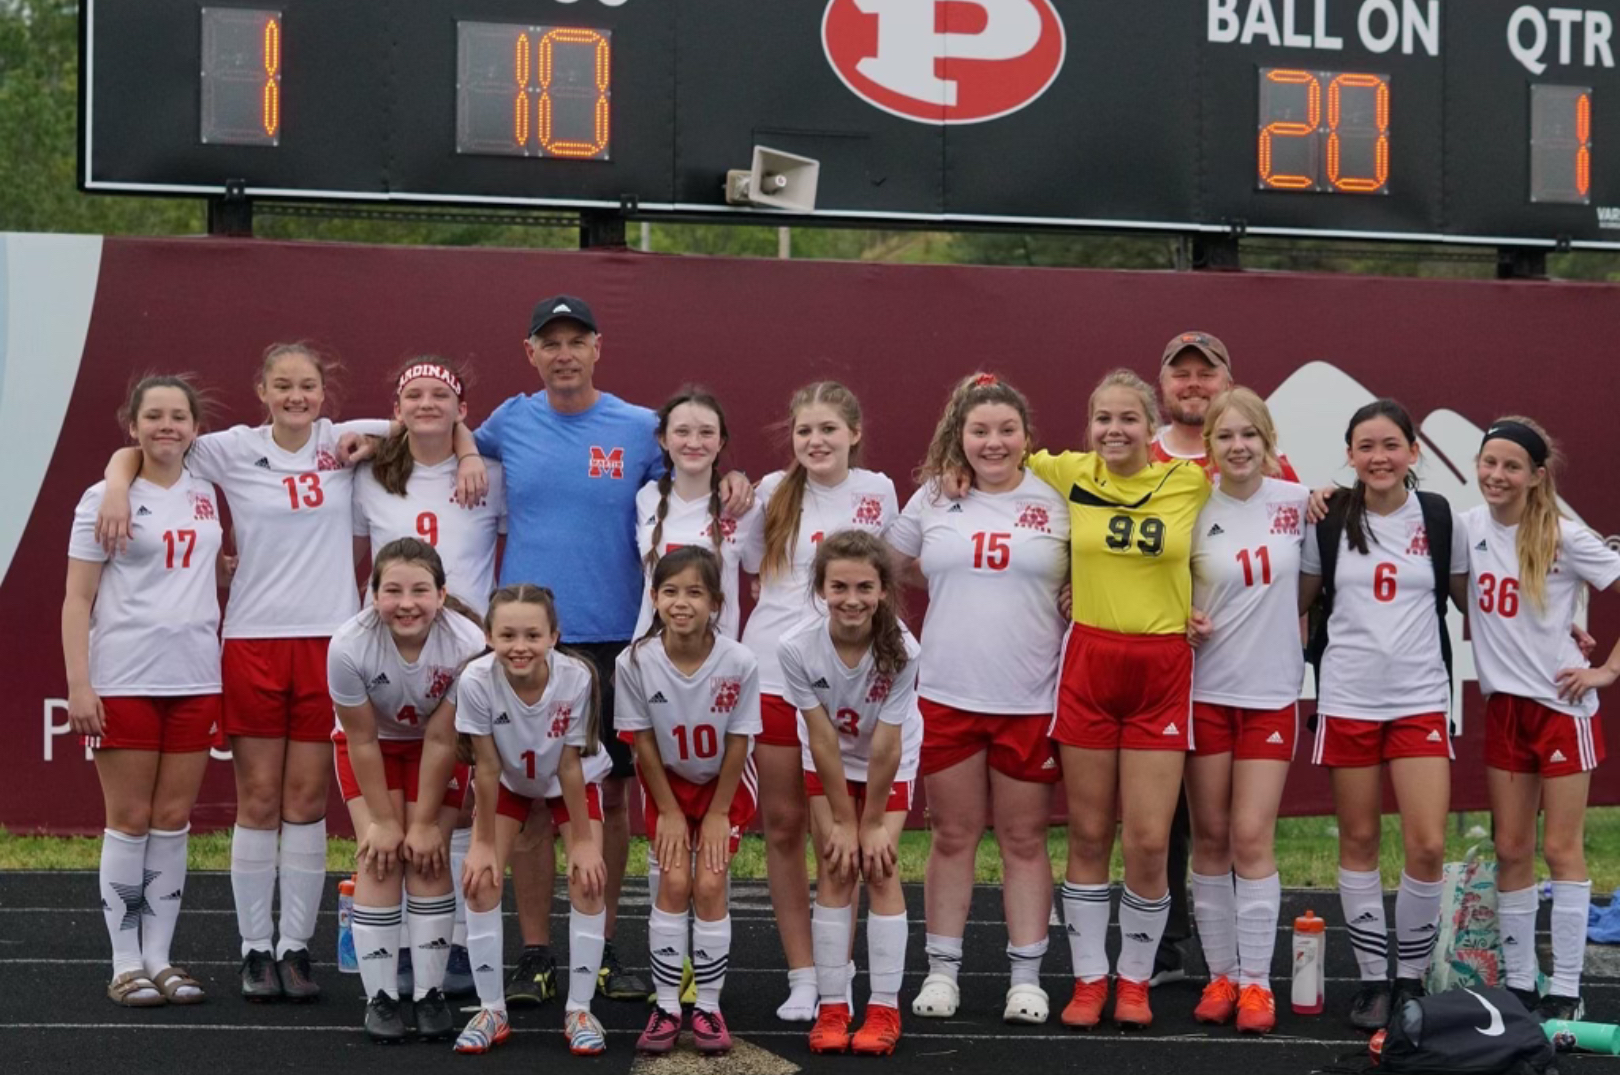 Lady Cards Soccer finishes 1-1 week